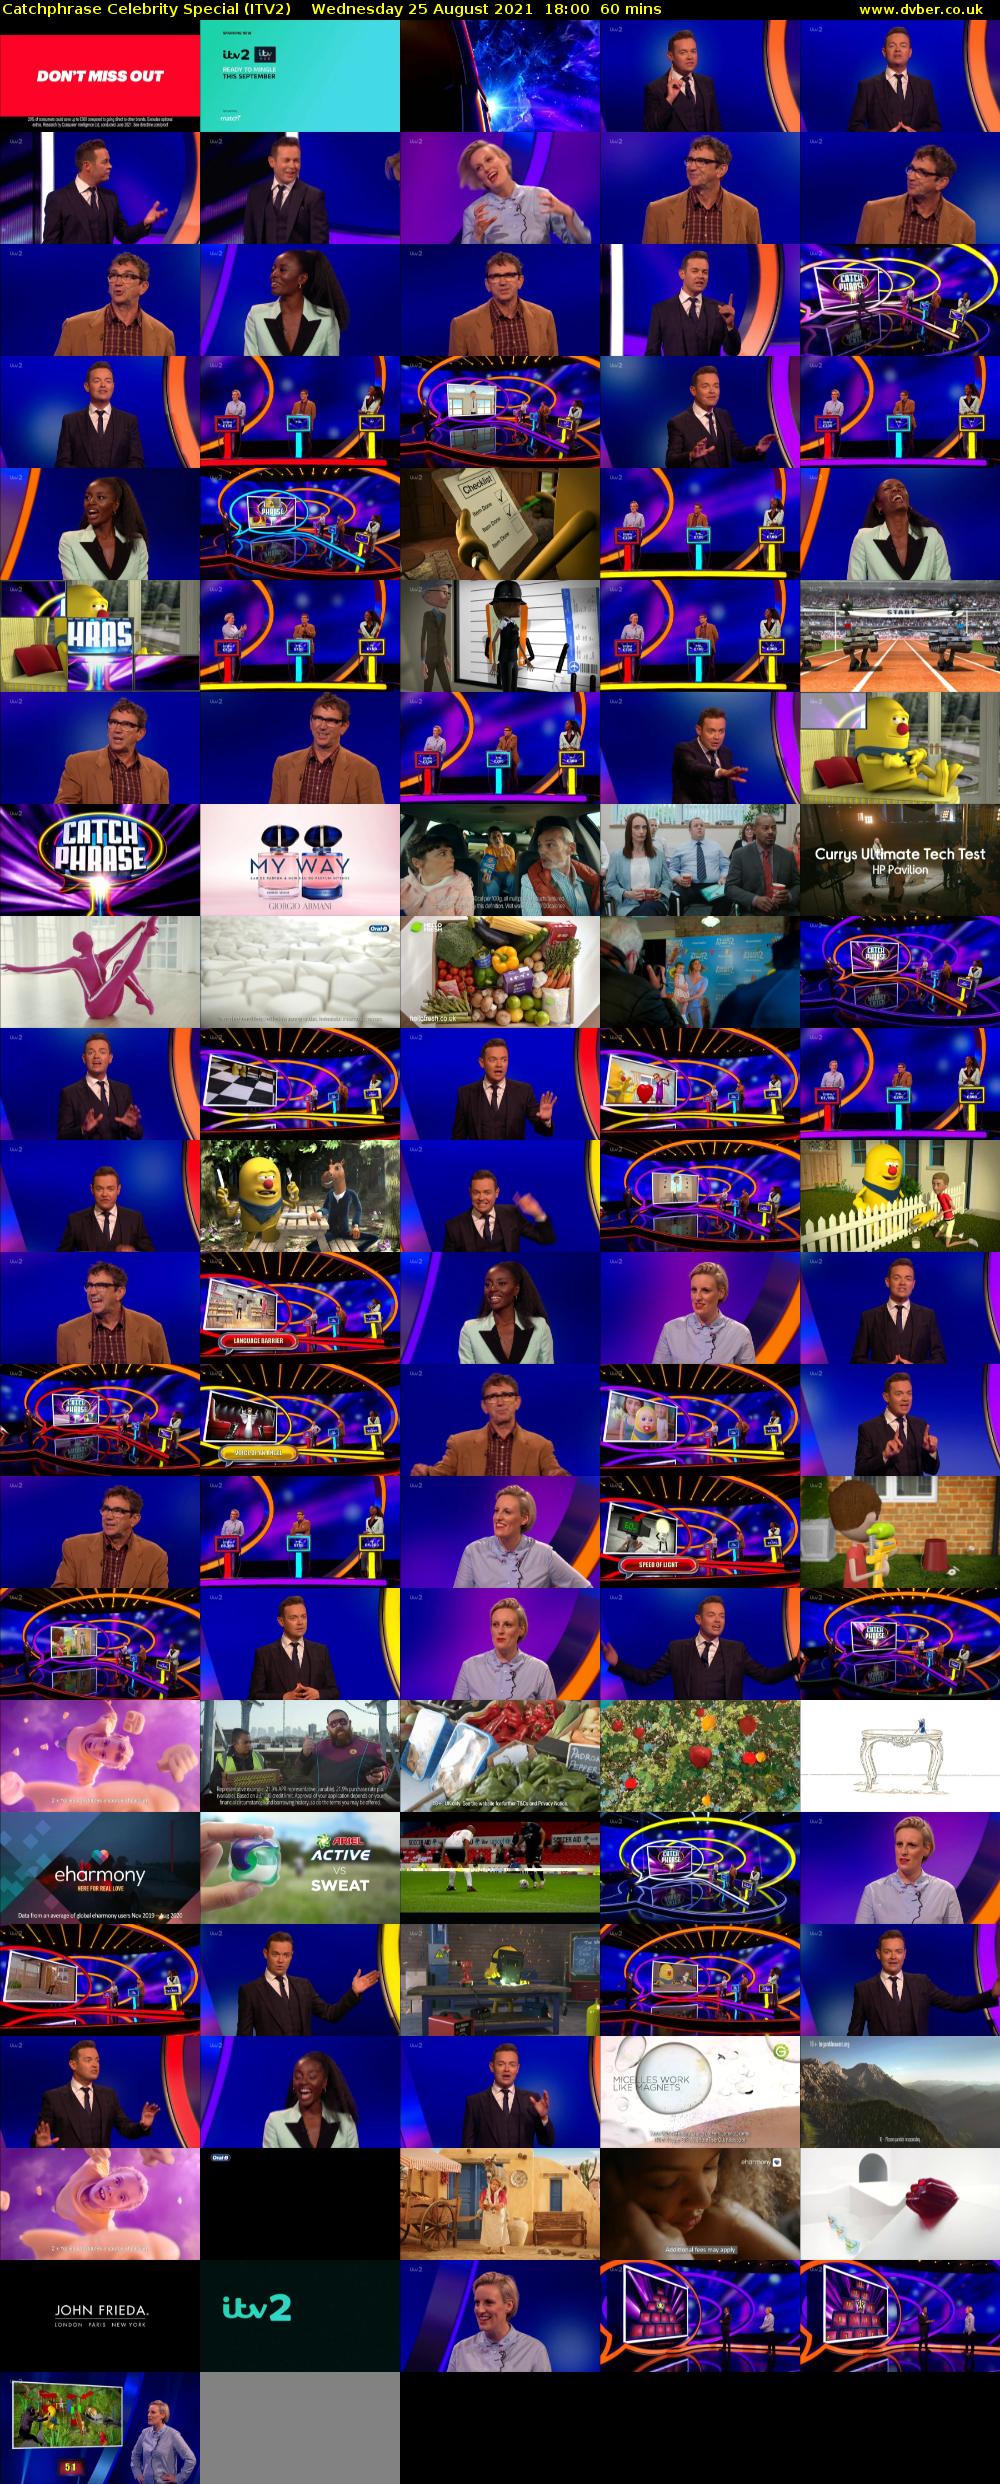 Catchphrase Celebrity Special (ITV2) Wednesday 25 August 2021 18:00 - 19:00